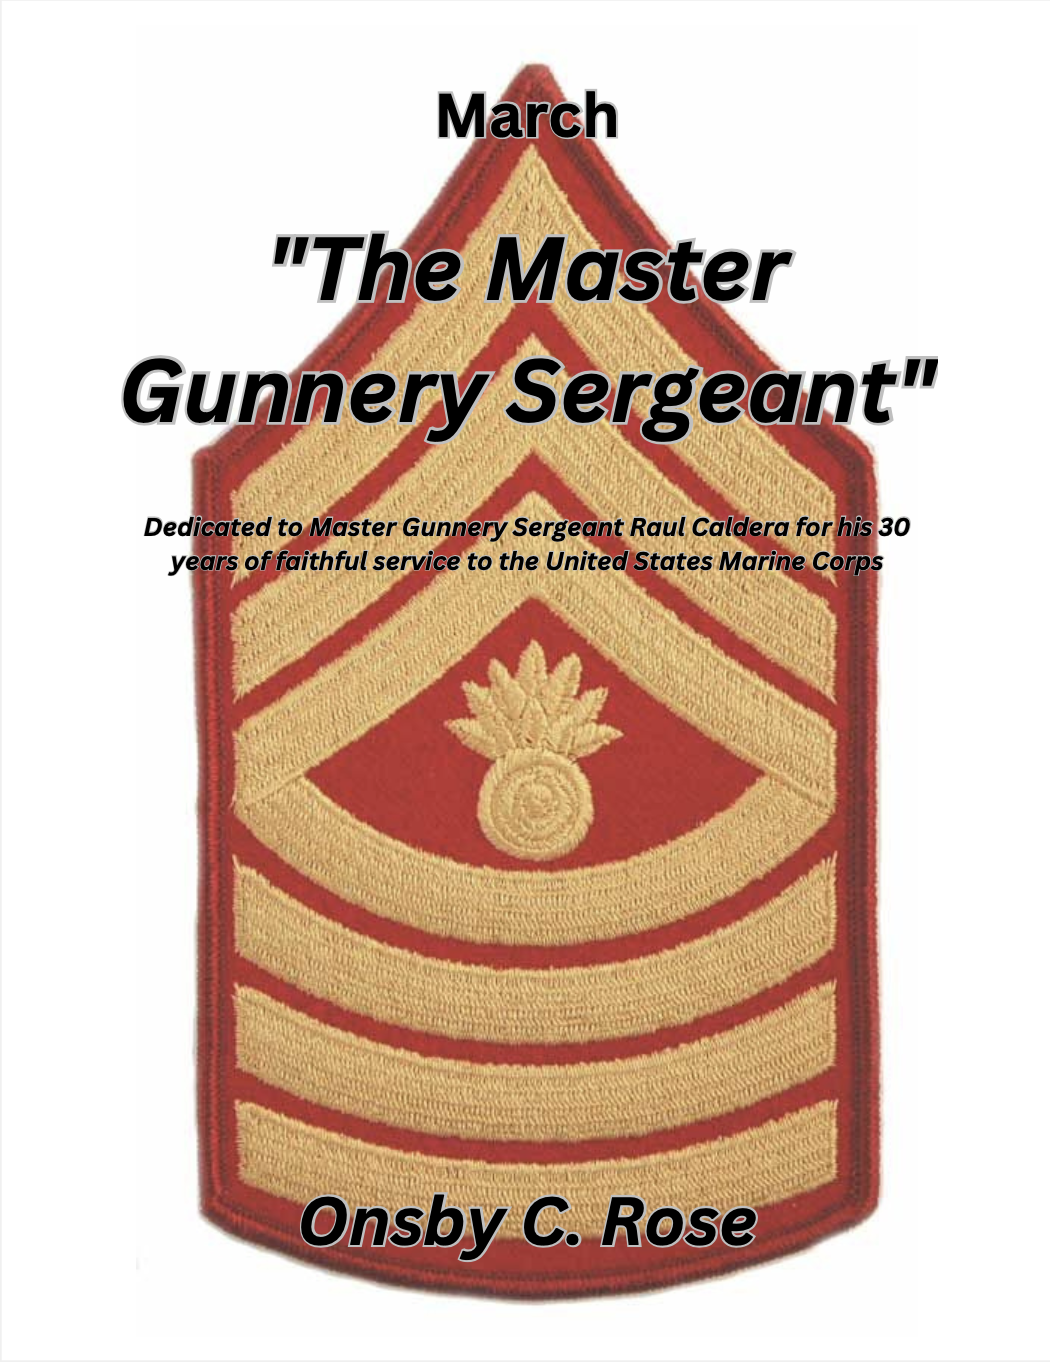 The Master Gunnery Sargent by Onsby C. Rose